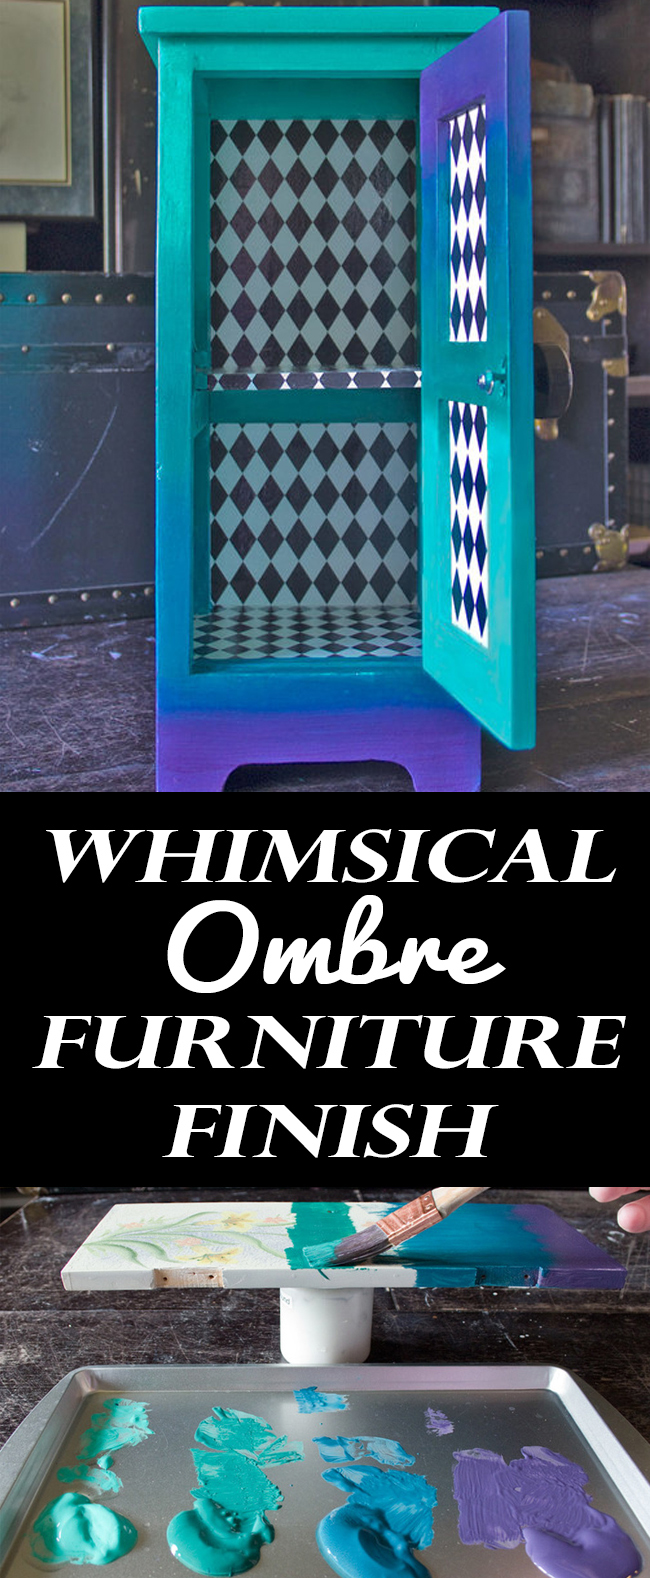 Whimsical Ombre Furniture Finish